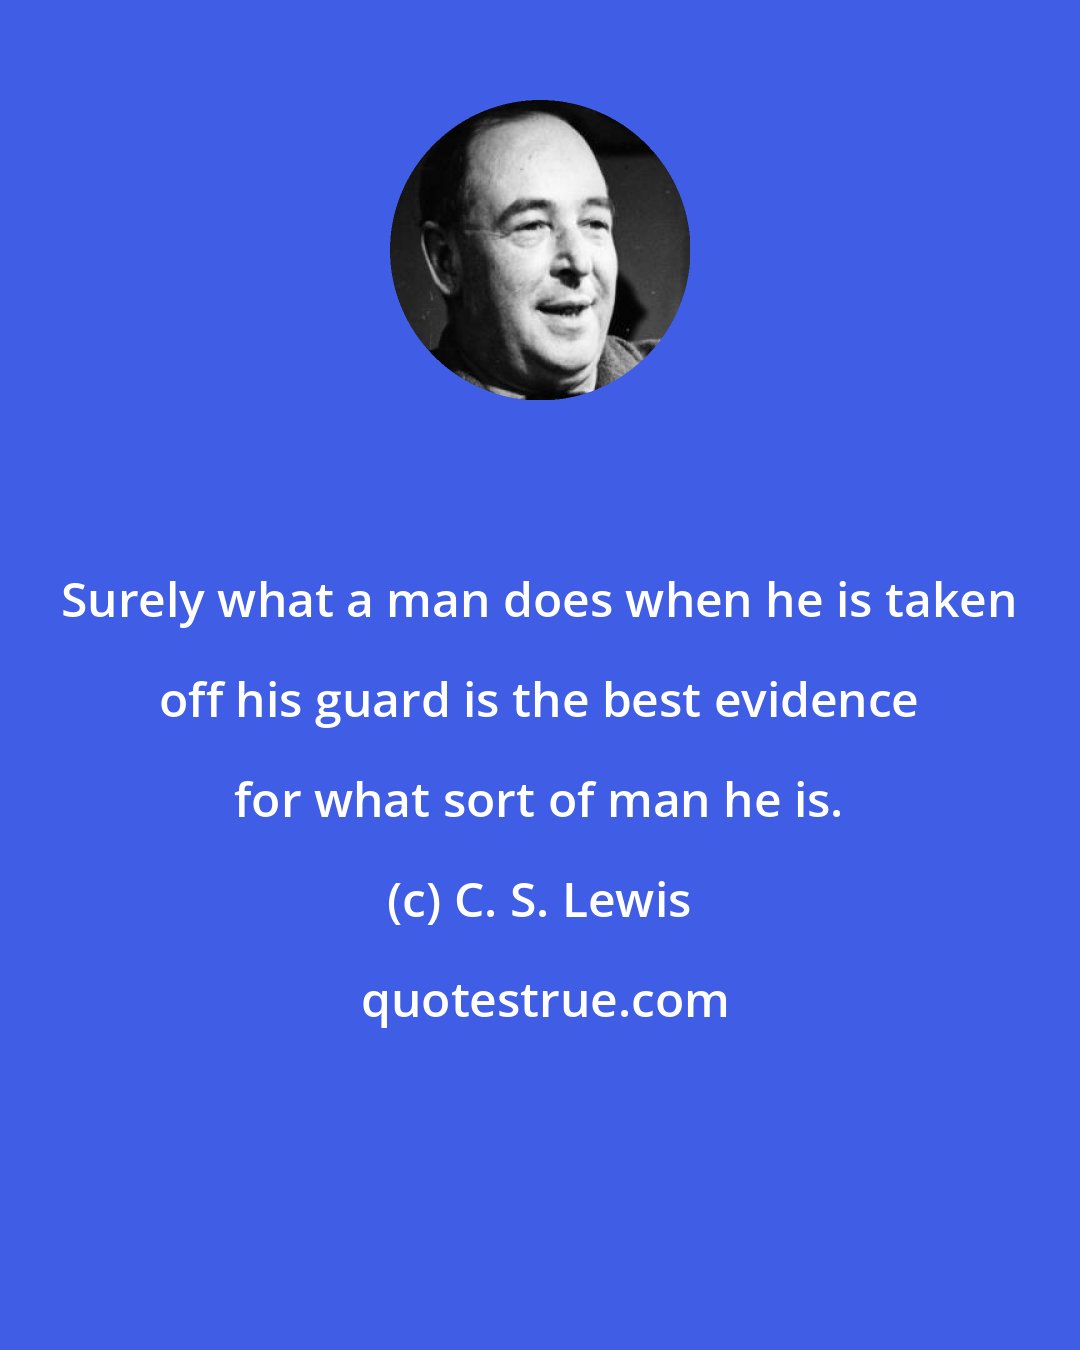 C. S. Lewis: Surely what a man does when he is taken off his guard is the best evidence for what sort of man he is.